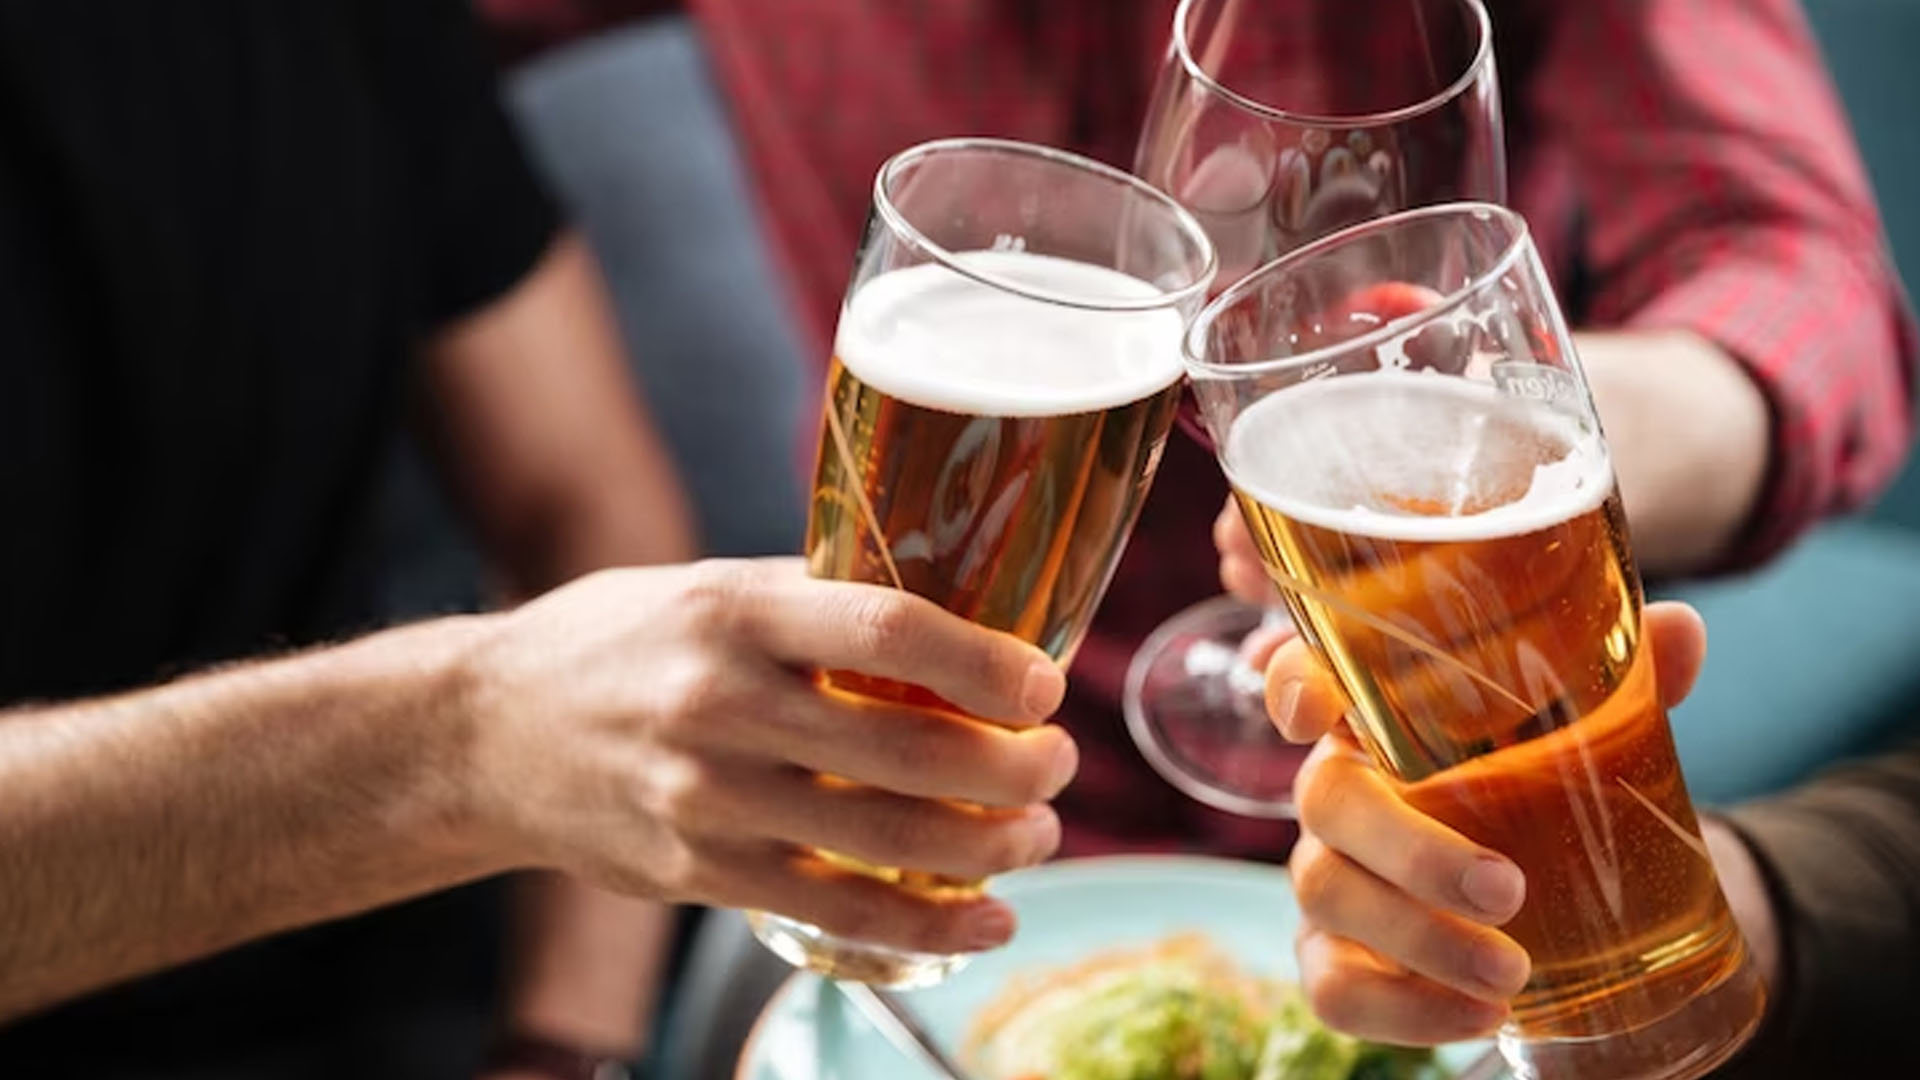 What Are The Health Benefits of Alcohol?